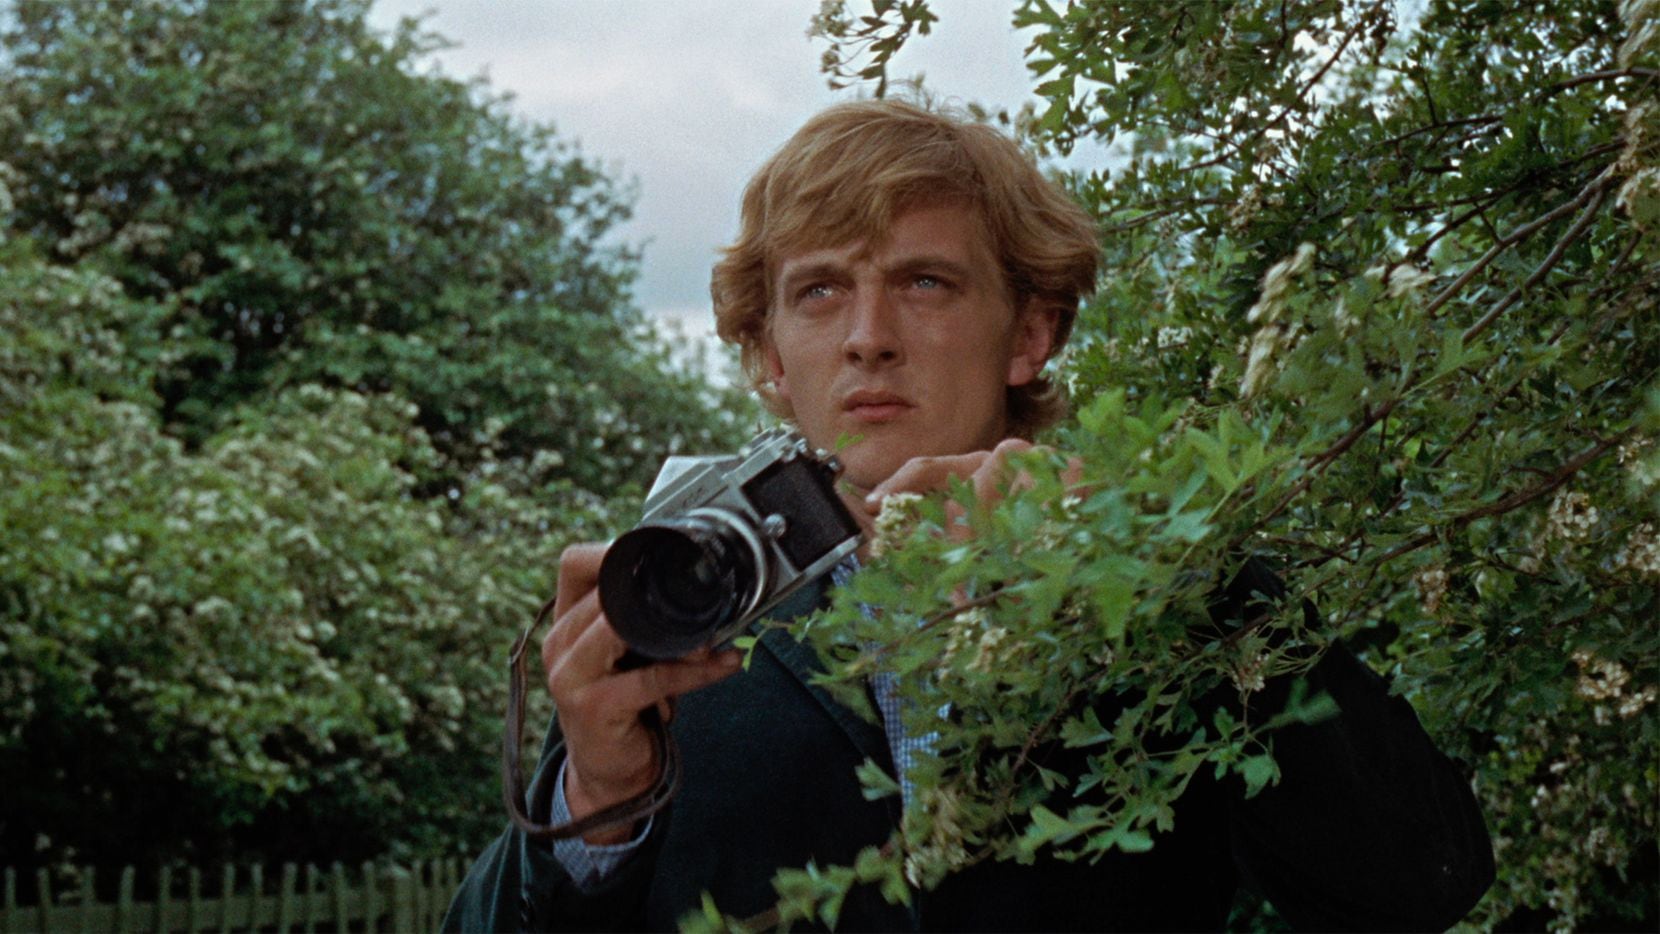 Blow-up Movie Review: Why Should Every Film Fan Watch Antonioni's Metacinematic Murder Mystery?